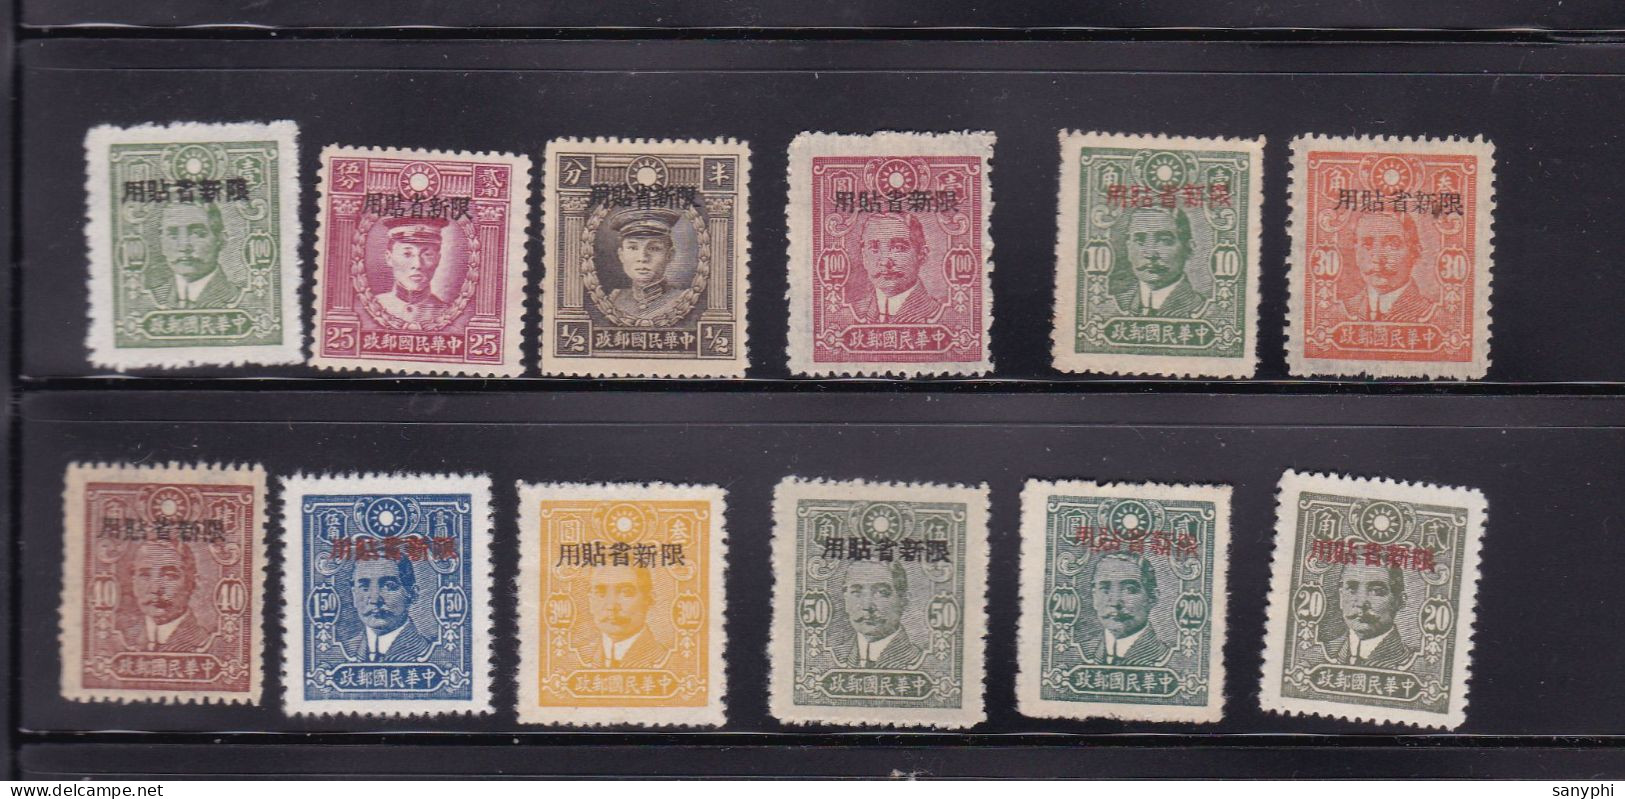 RO China Chine Various Dr Sun Ovpt Sinkiang Diffs 12 Stamps ML - 1912-1949 République